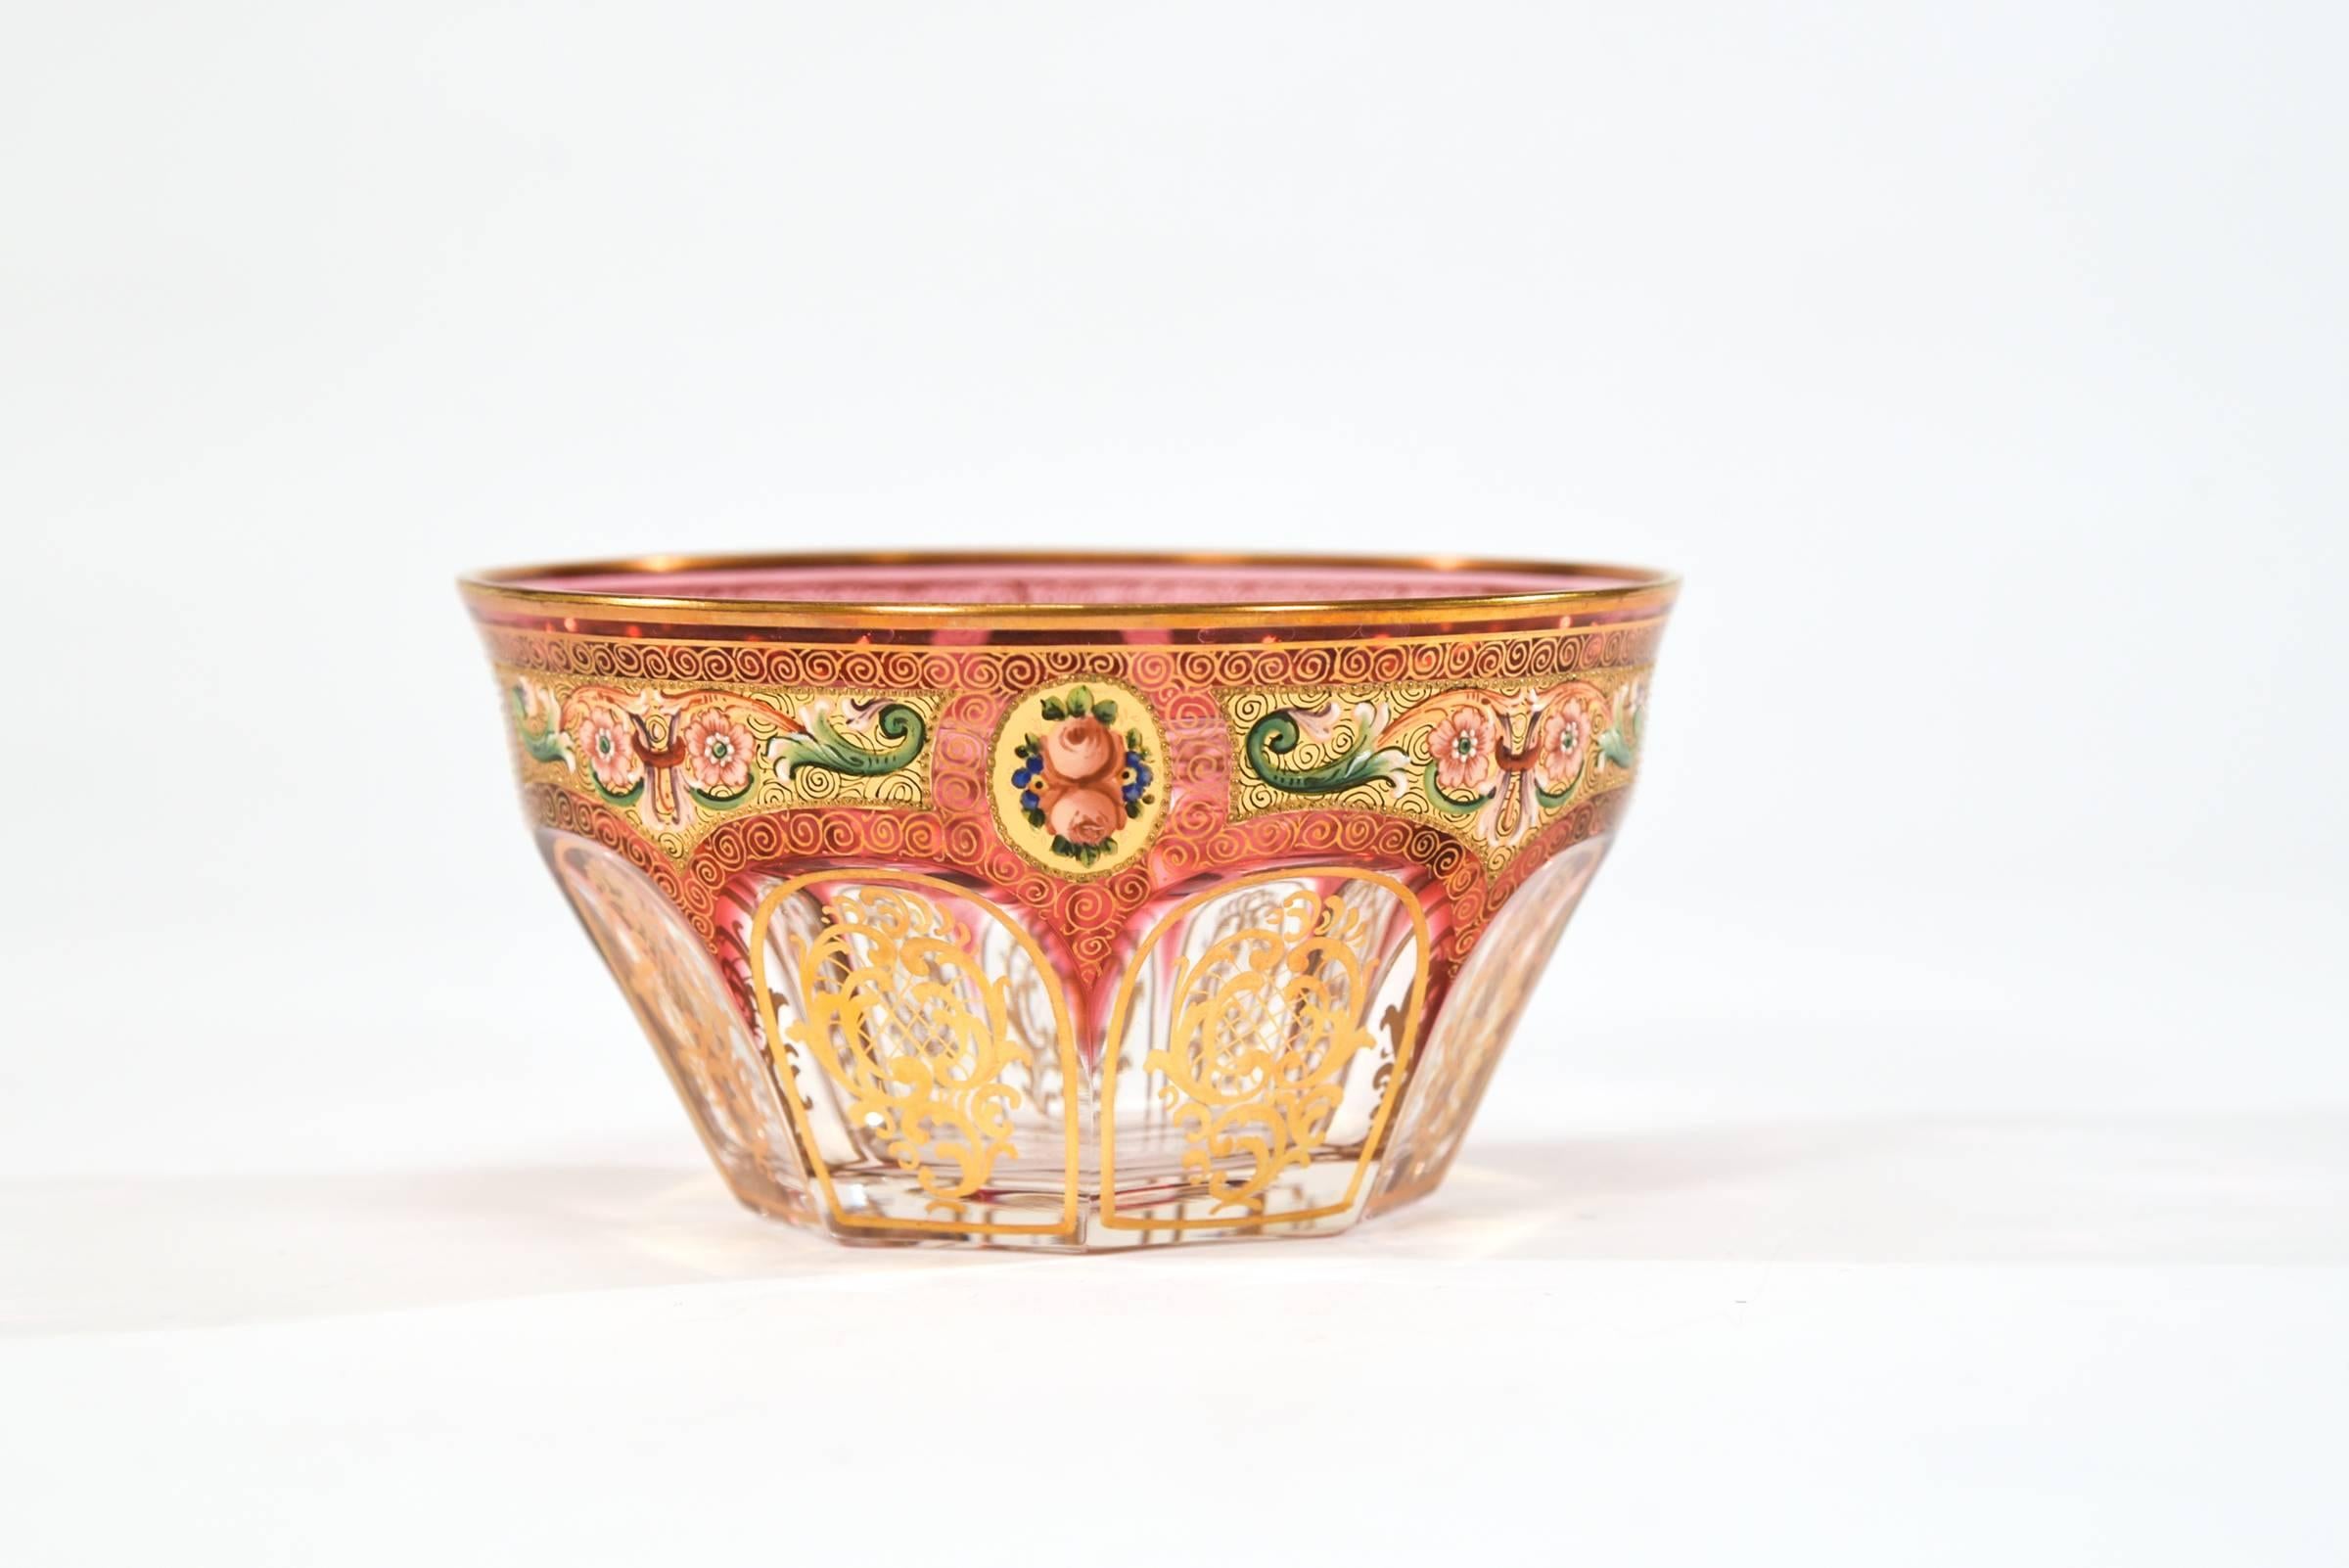 Early 20th Century 12 Baccarat Octagonal Crystal Bowls with Hand-Painted and Gilt Decoration